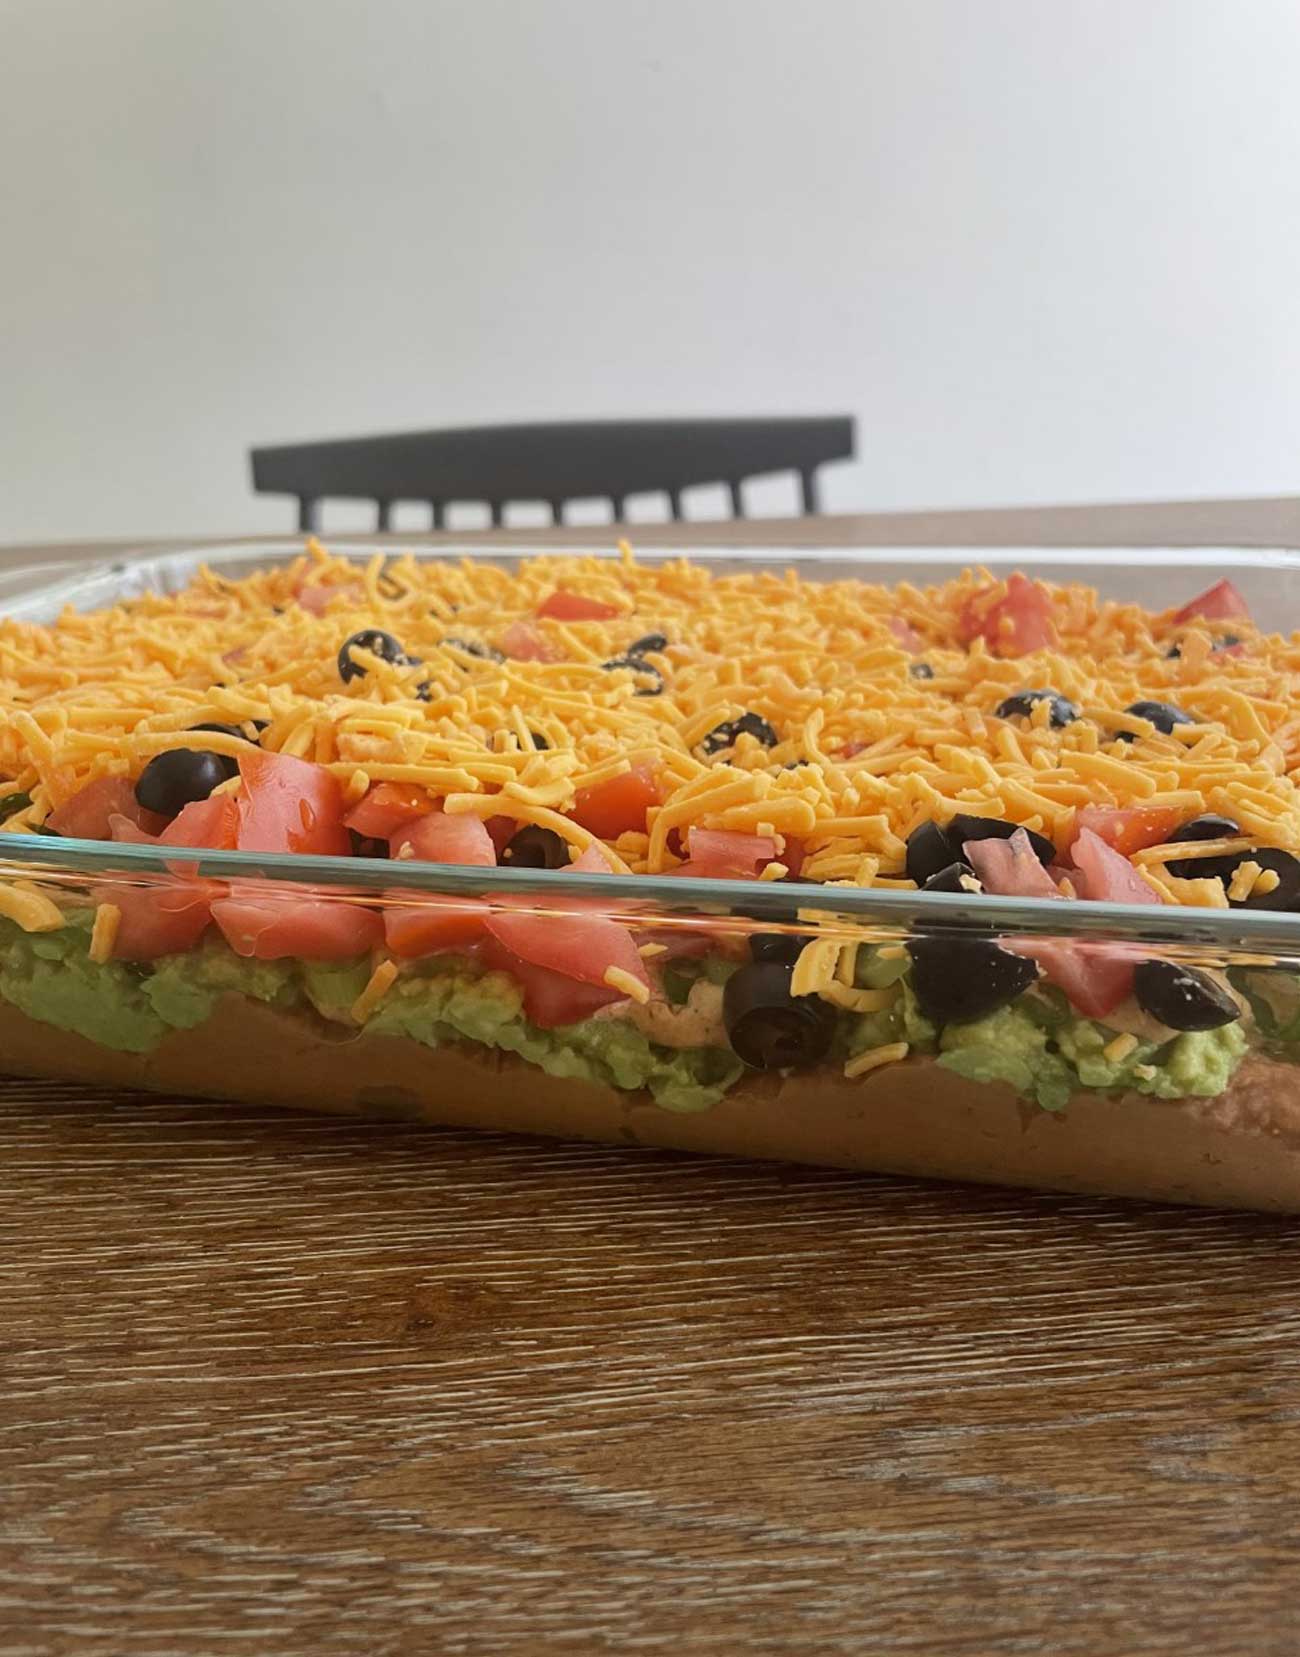 The famous seven layer tex-mex dip